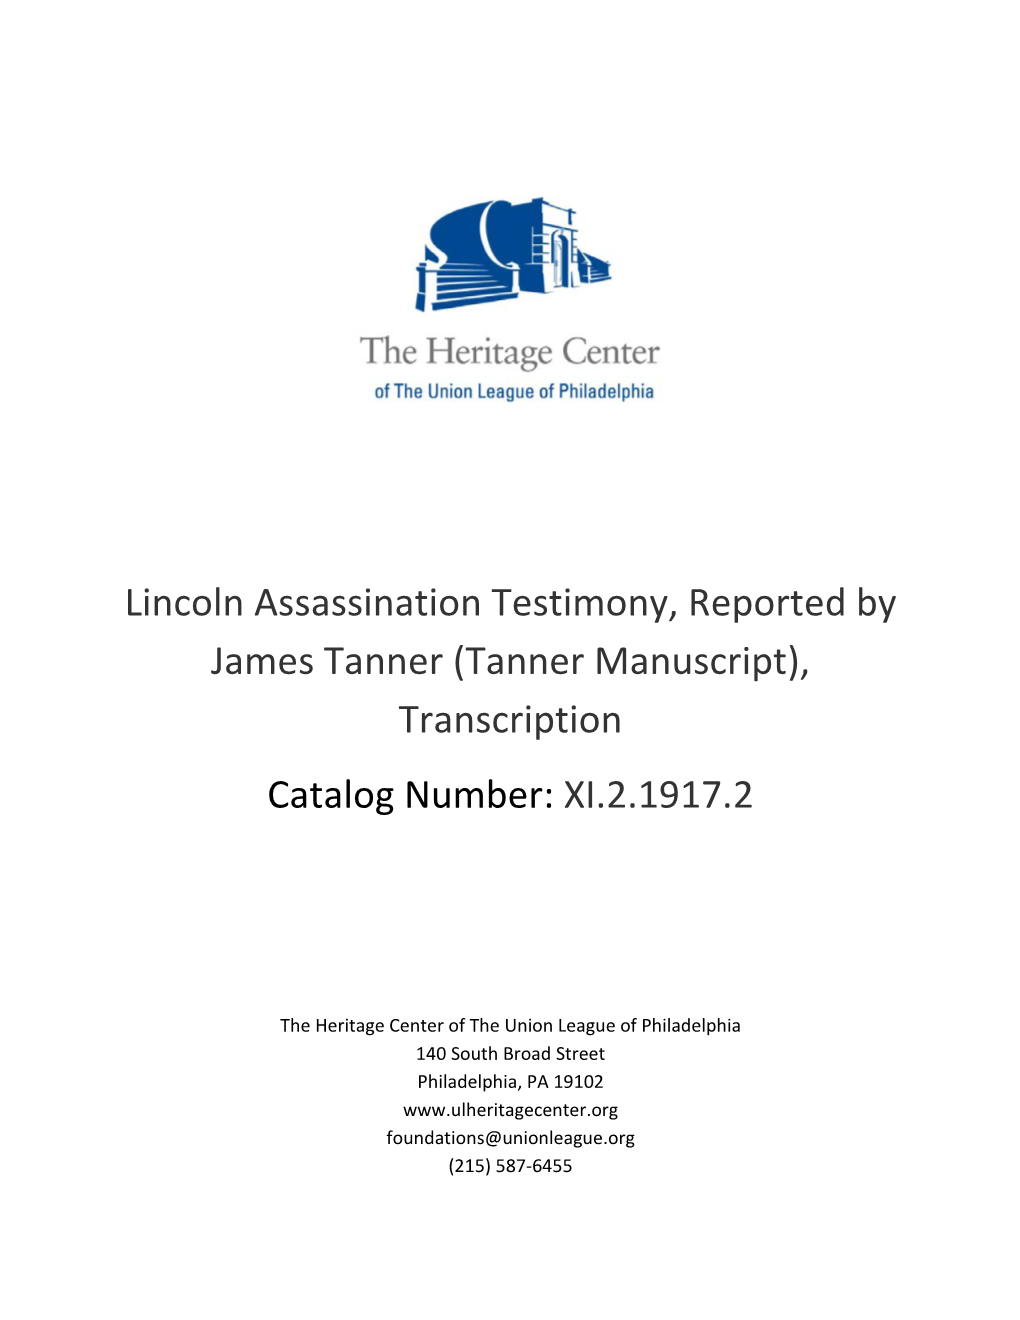 Lincoln Assassination Testimony, Reported by James Tanner (Tanner Manuscript), Transcription Catalog Number: XI.2.1917.2